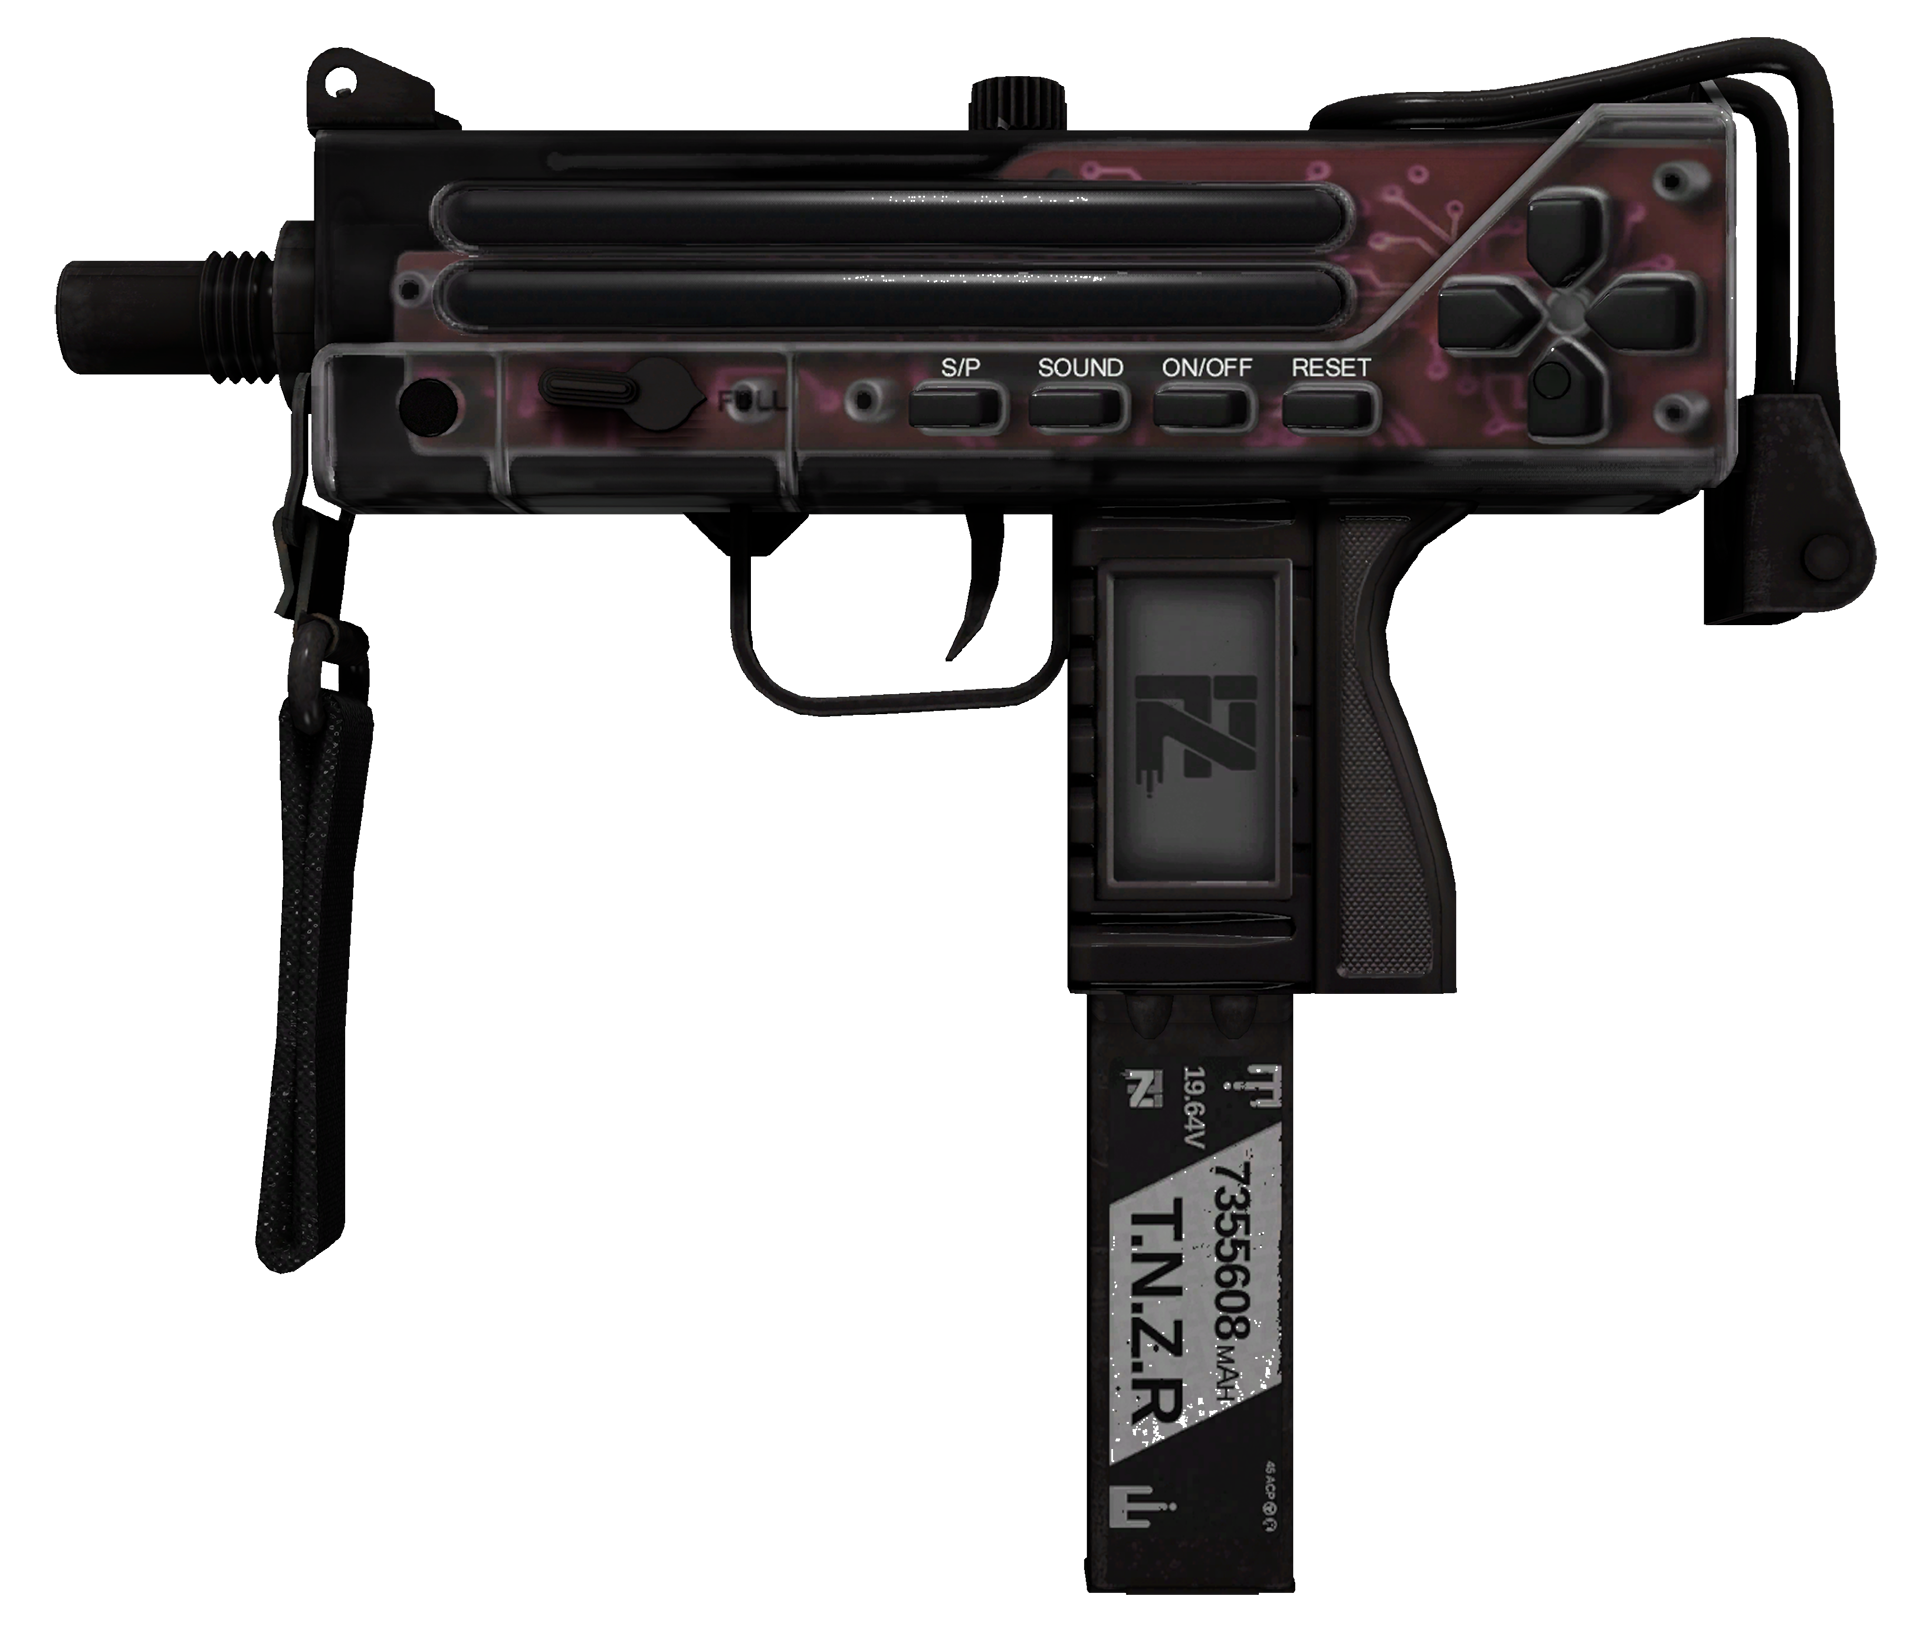 MAC-10 Button Masher cs go skin download the last version for android